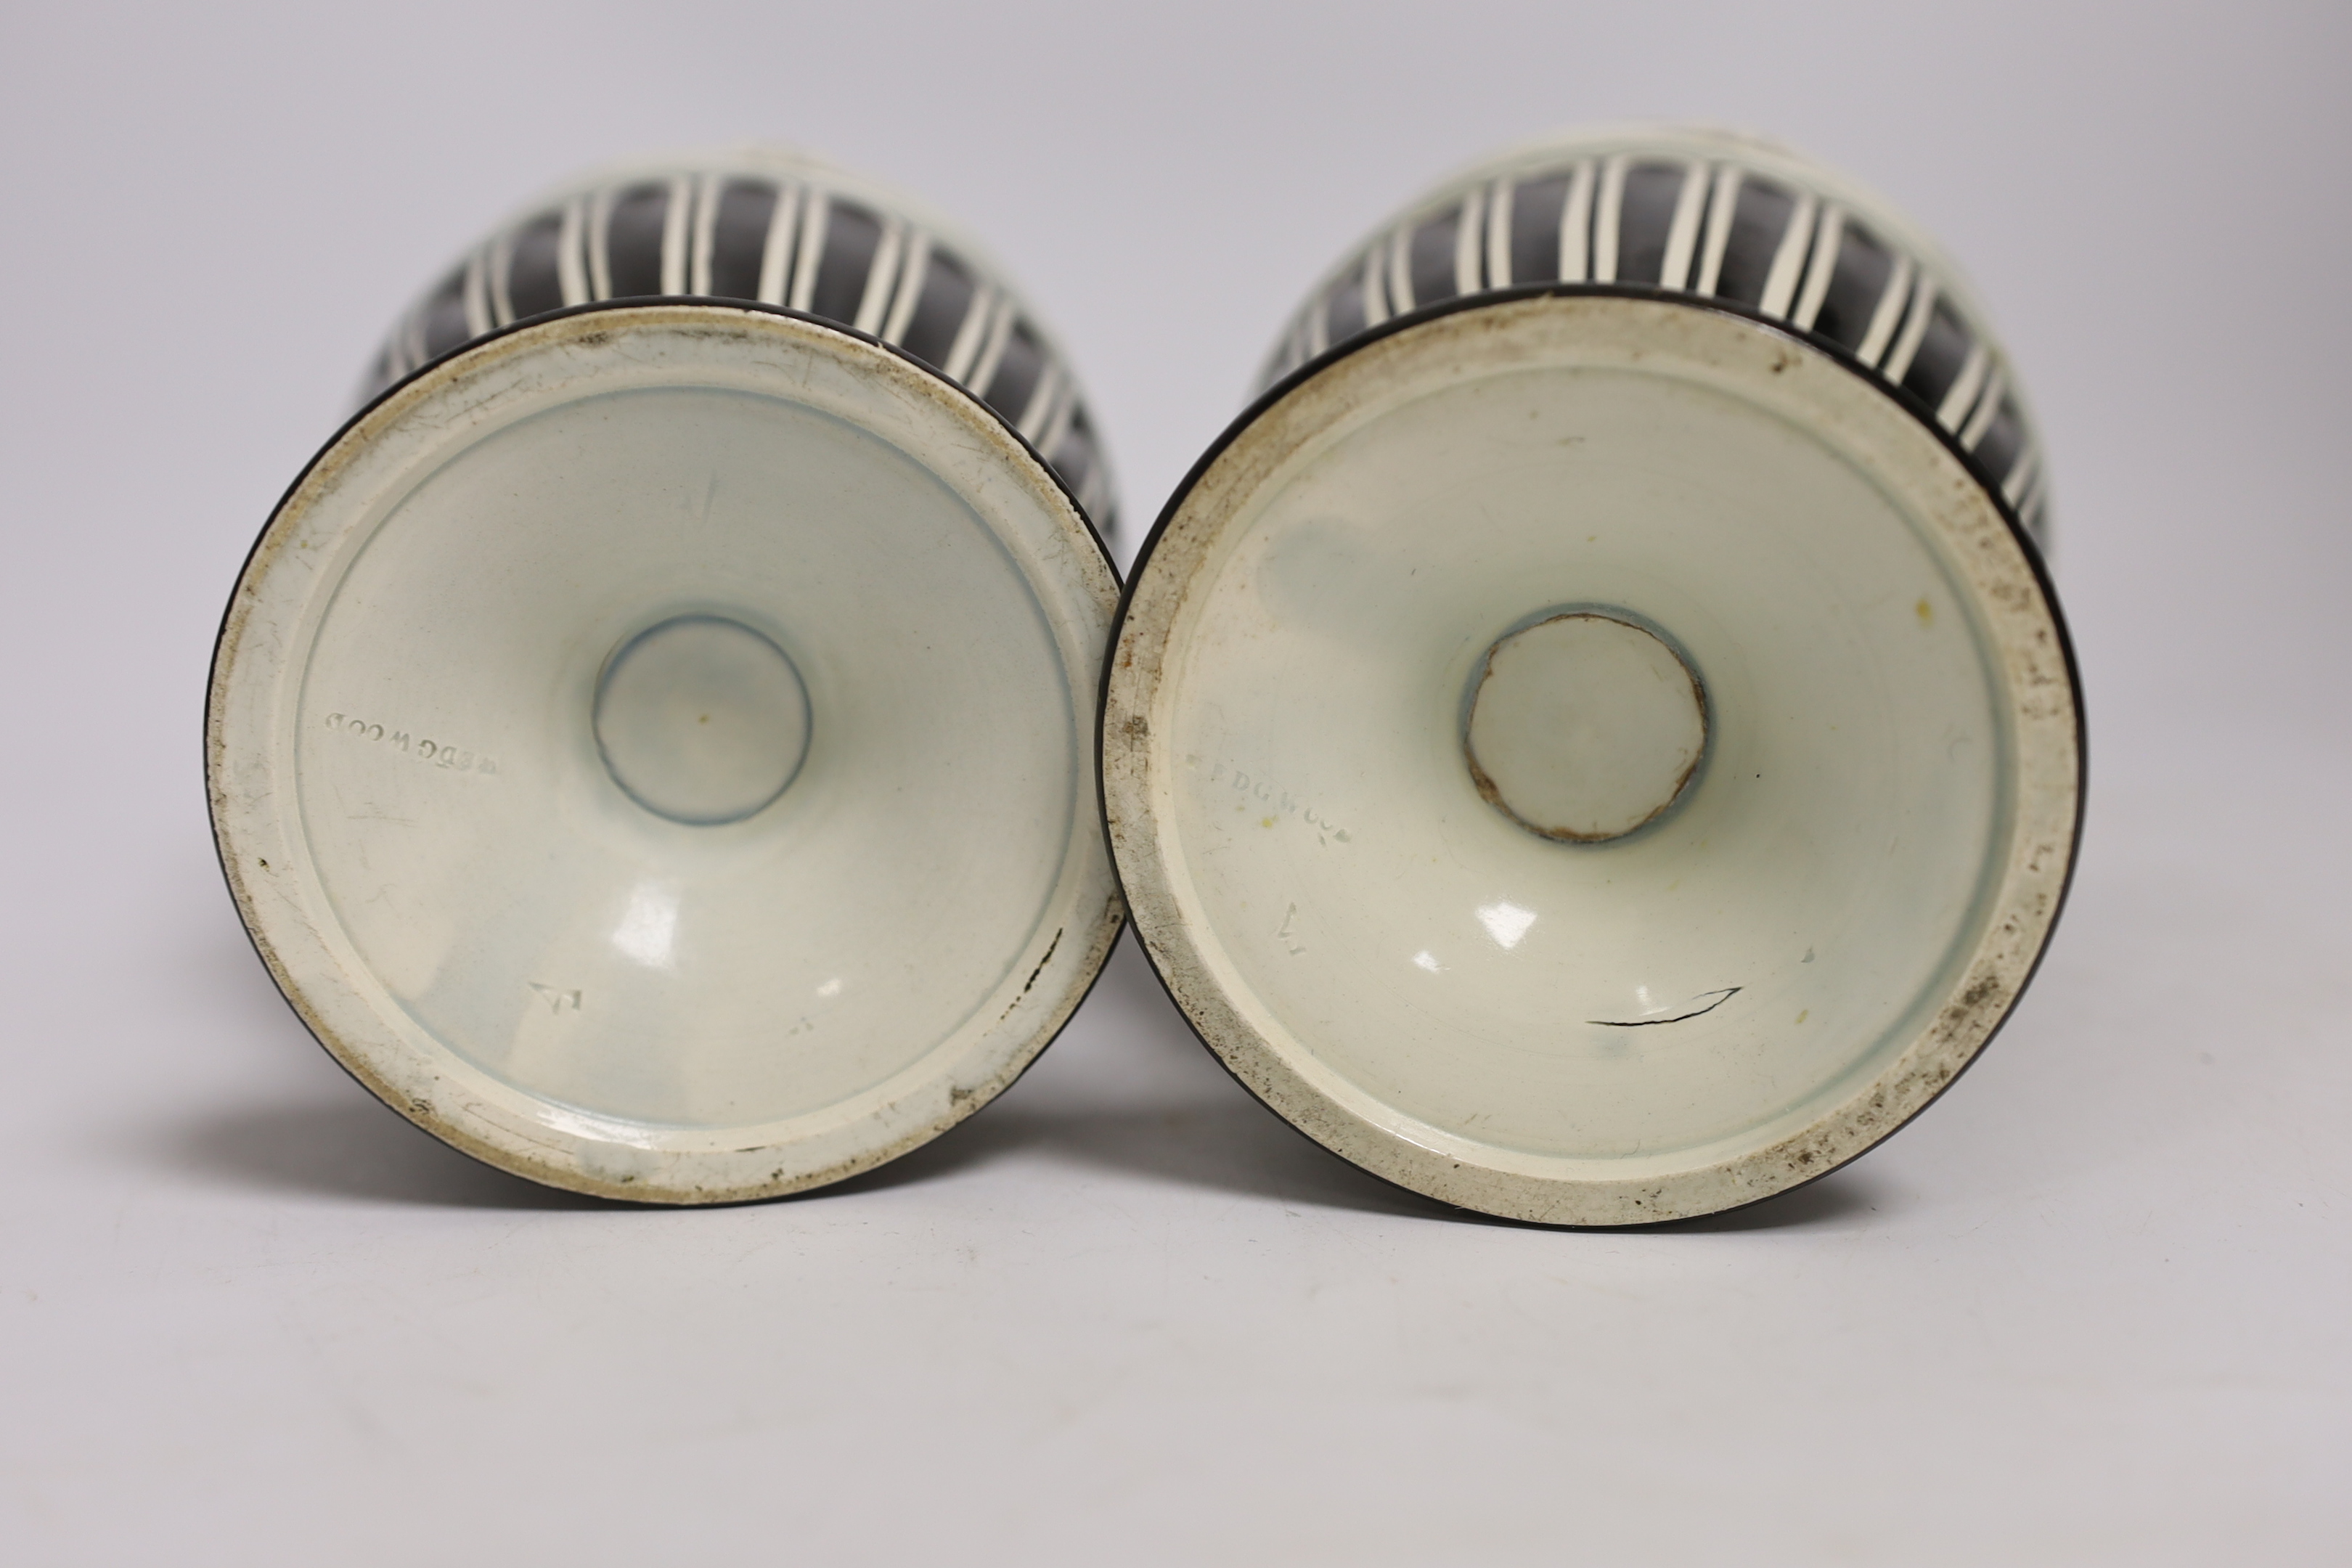 A pair of early 19th century Wedgwood creamware (pearlware) vases, 15.5cm